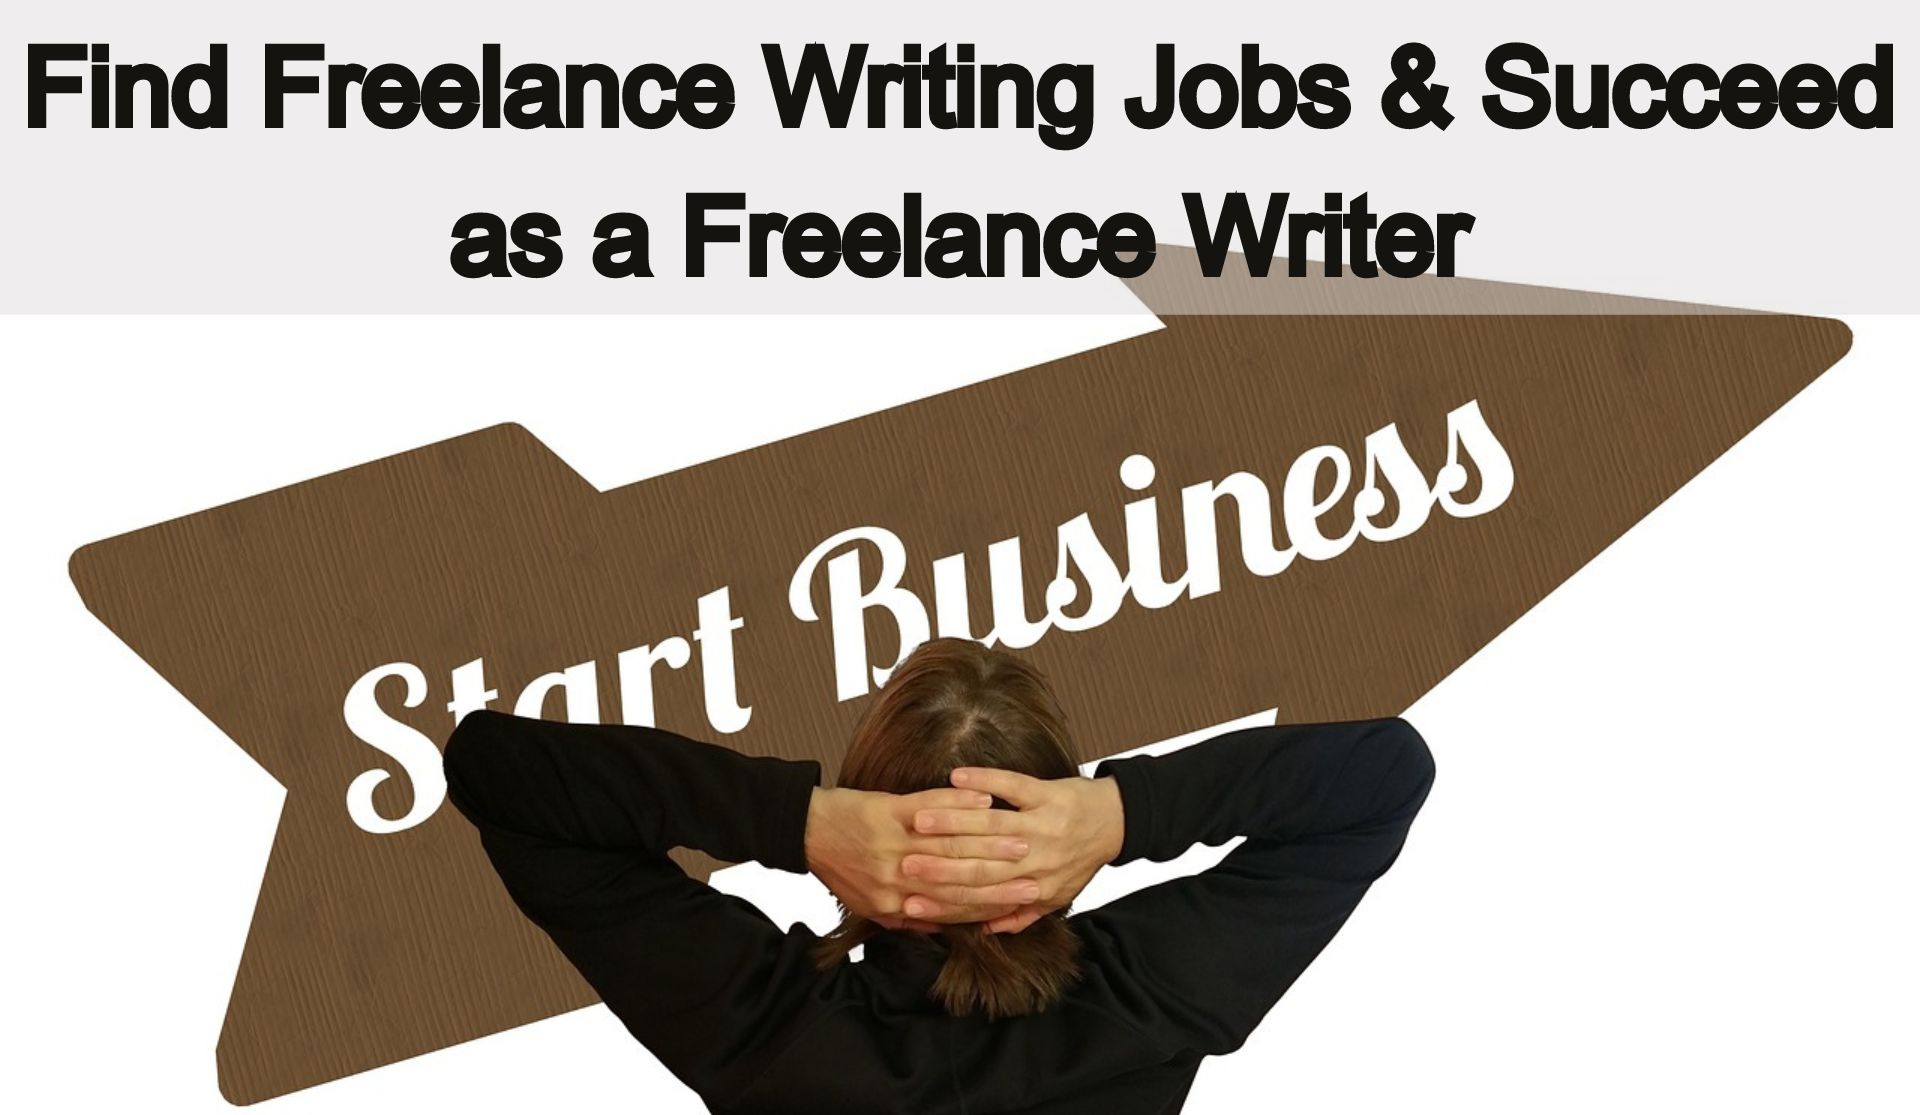 Find Freelance Writing Jobs & Succeed as a Freelance Writer